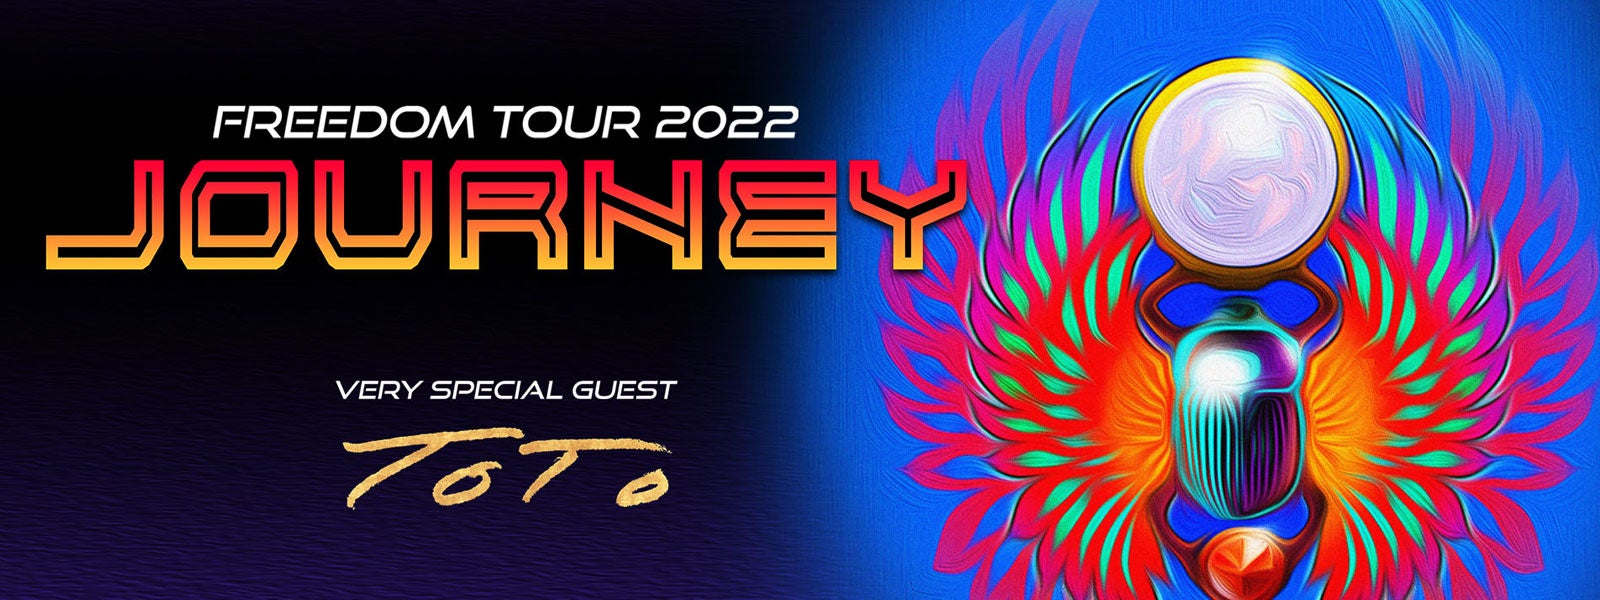 Journey: Freedom Tour 2022 with very special guest Toto